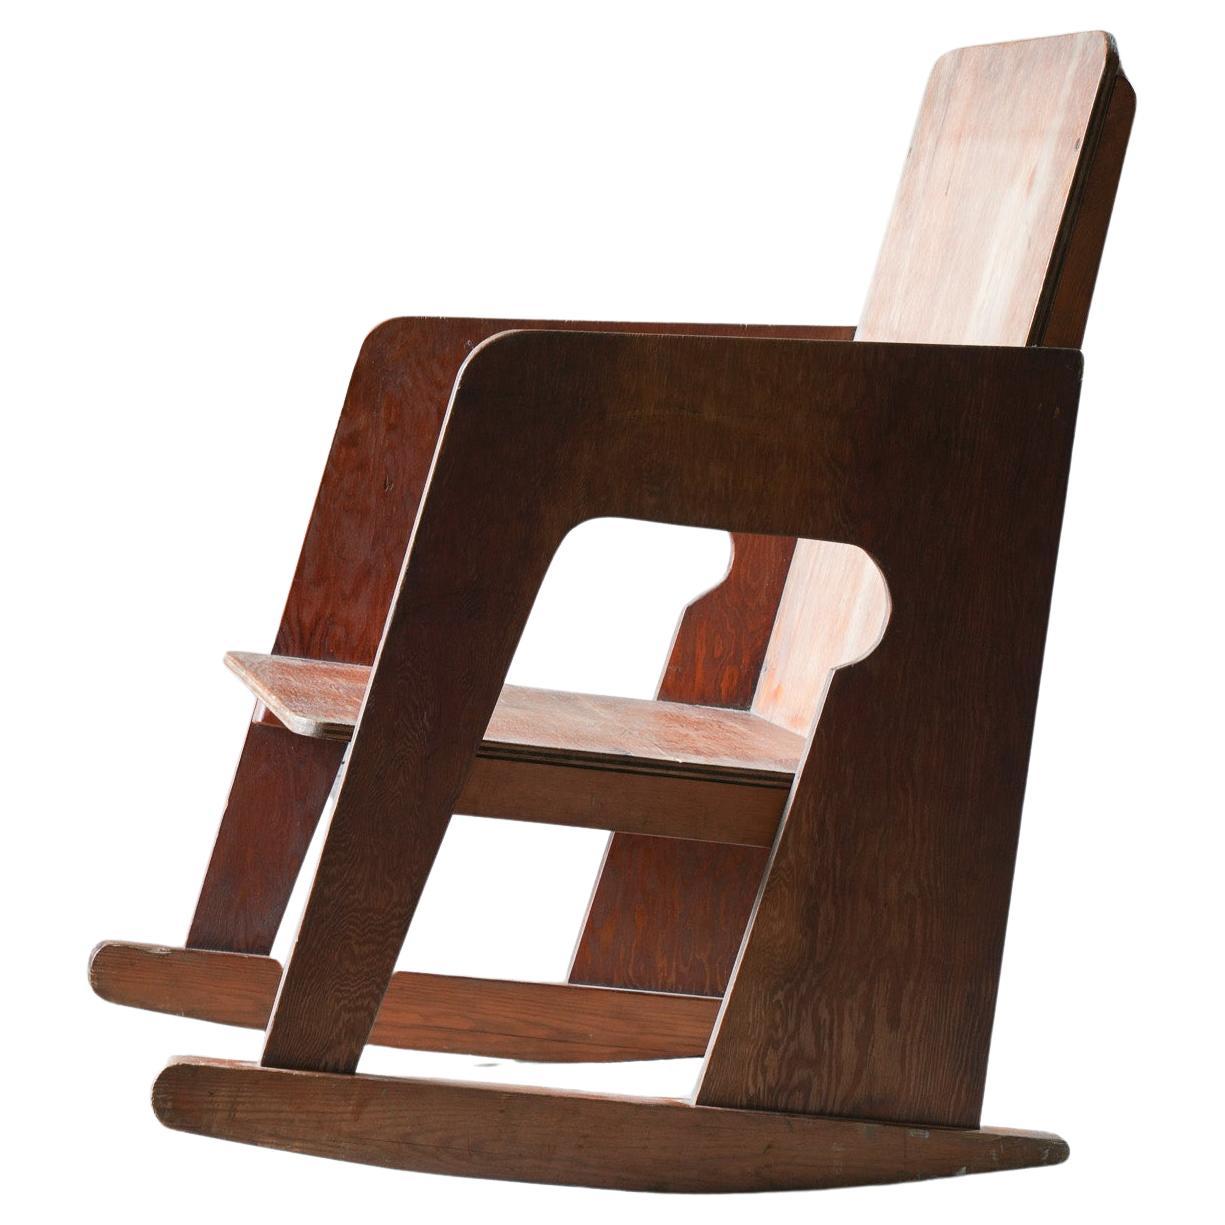 A Modernist Rocking Chair For Sale